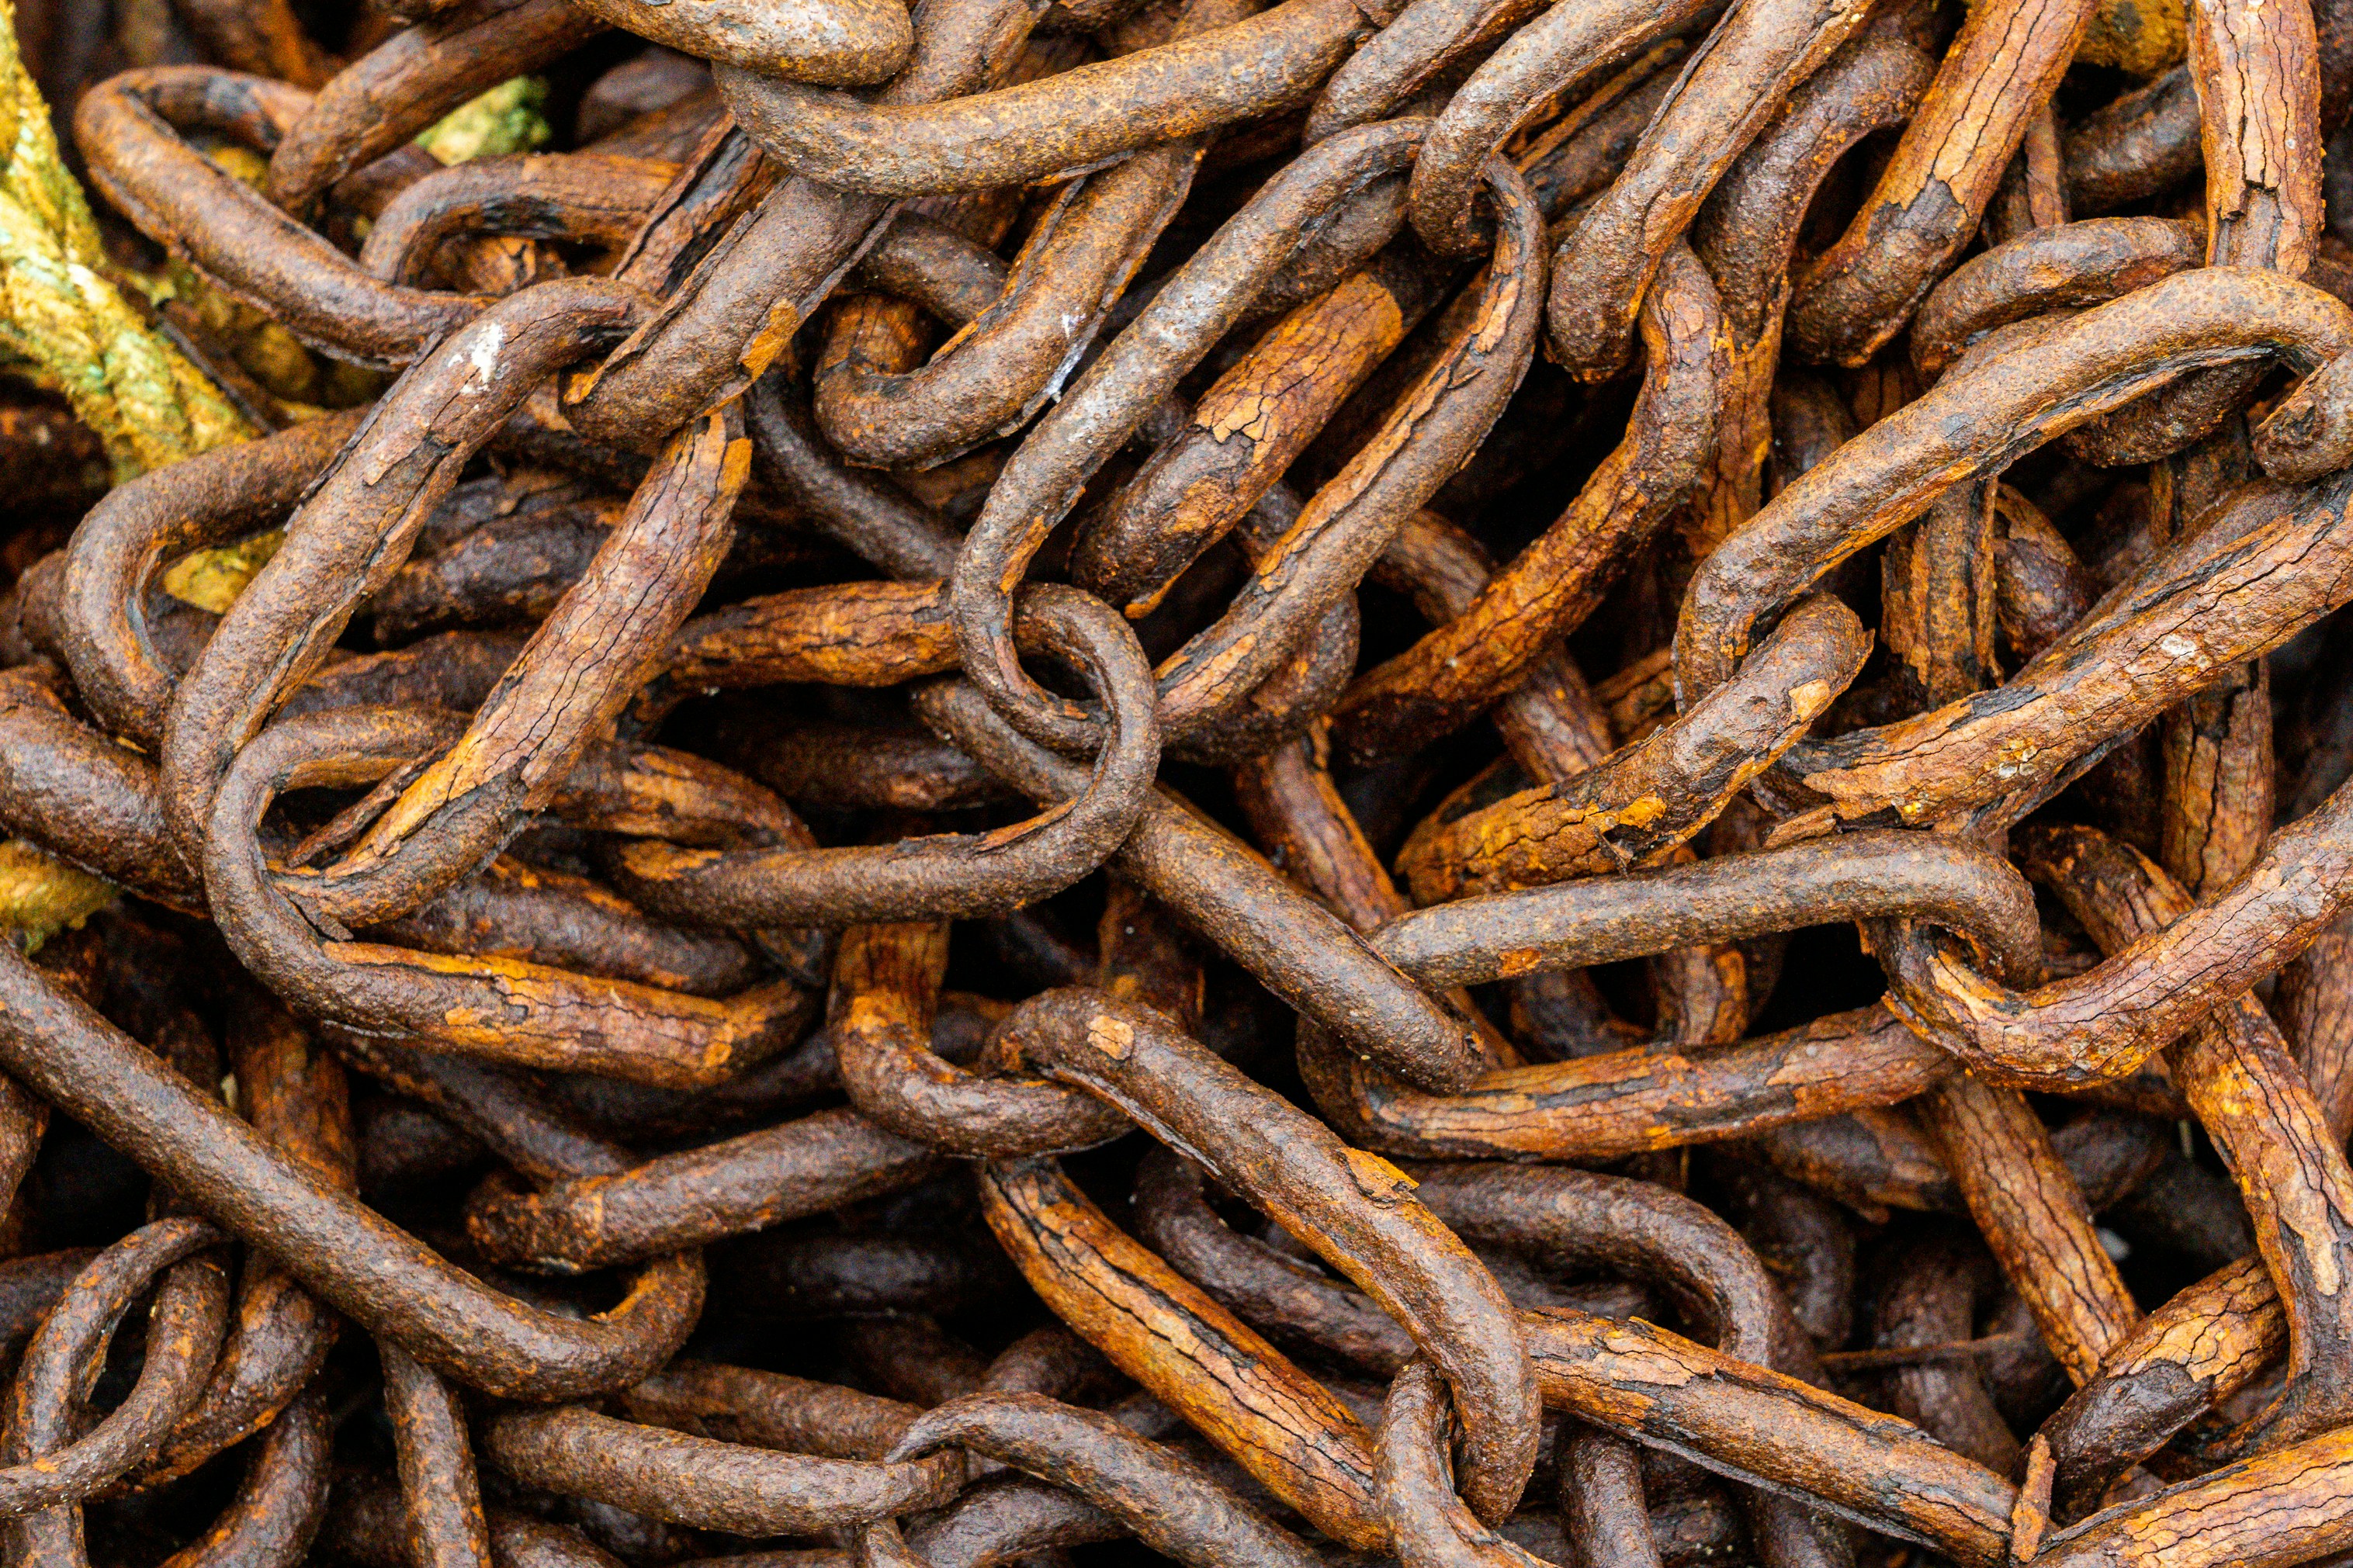 A pile of rusty chain links.